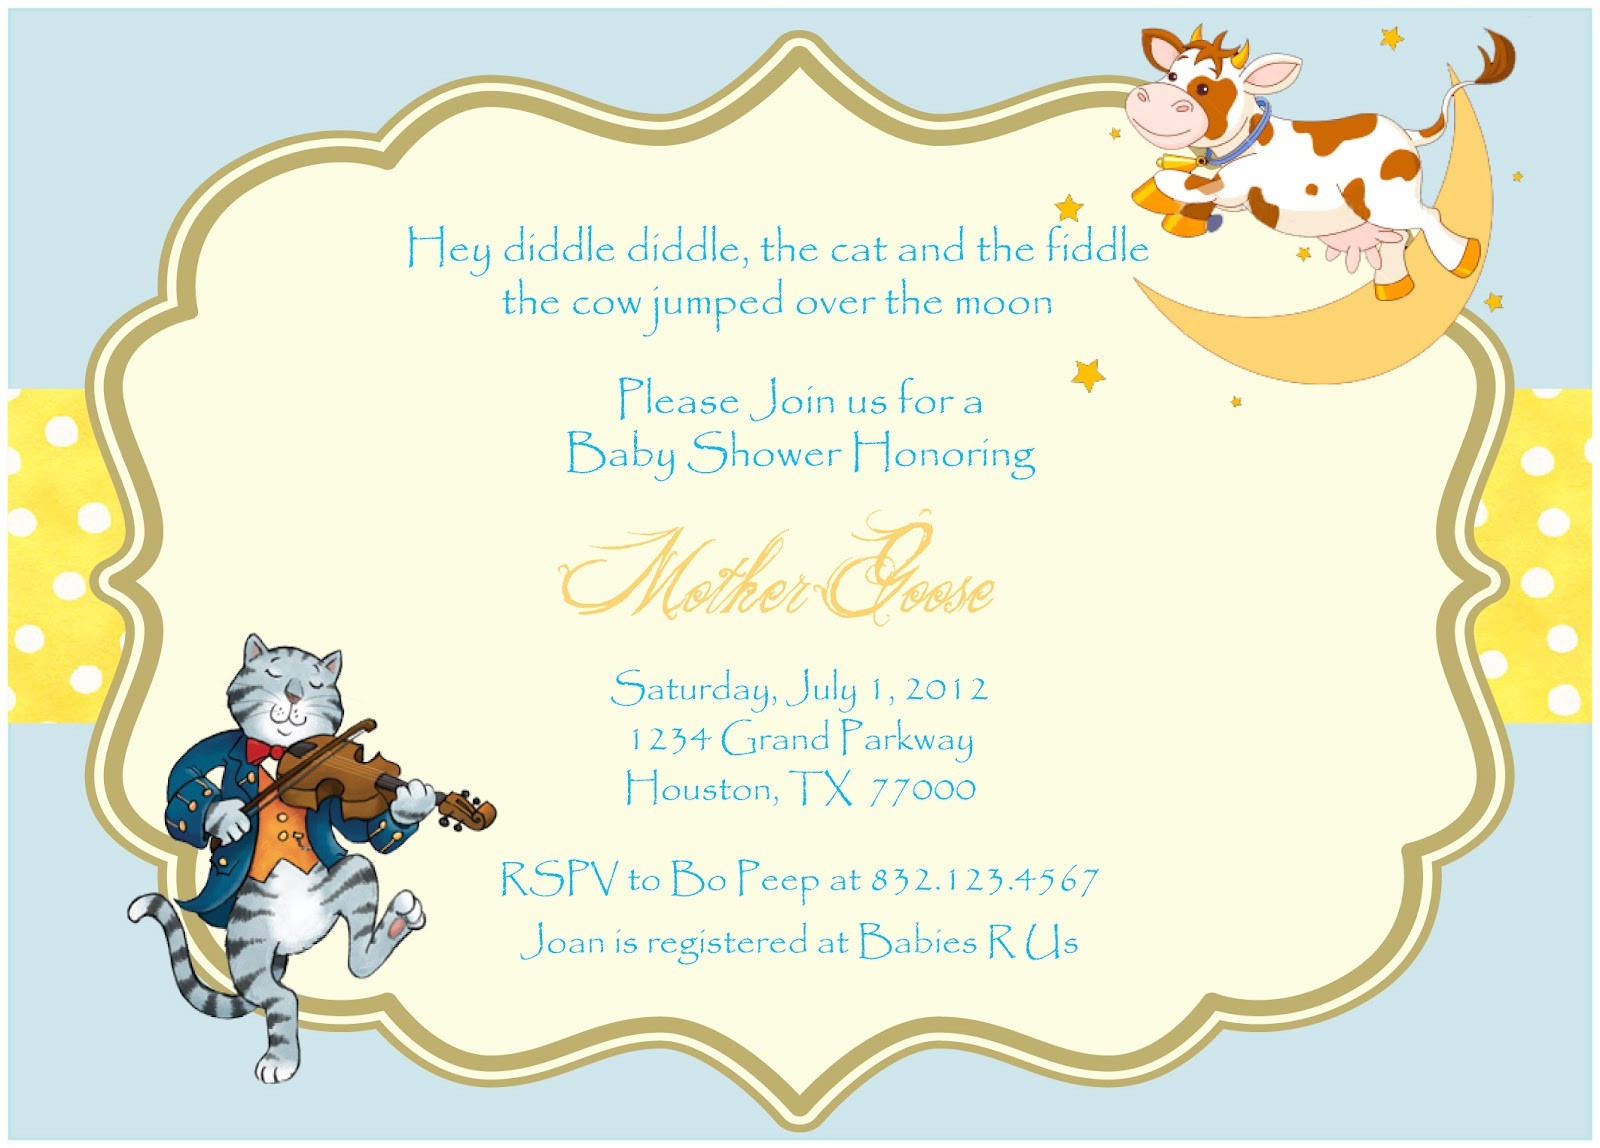 Baby Shower Rhyme Invite 3 Monkeys and More Nursery Rhyme Baby Shower Invitations